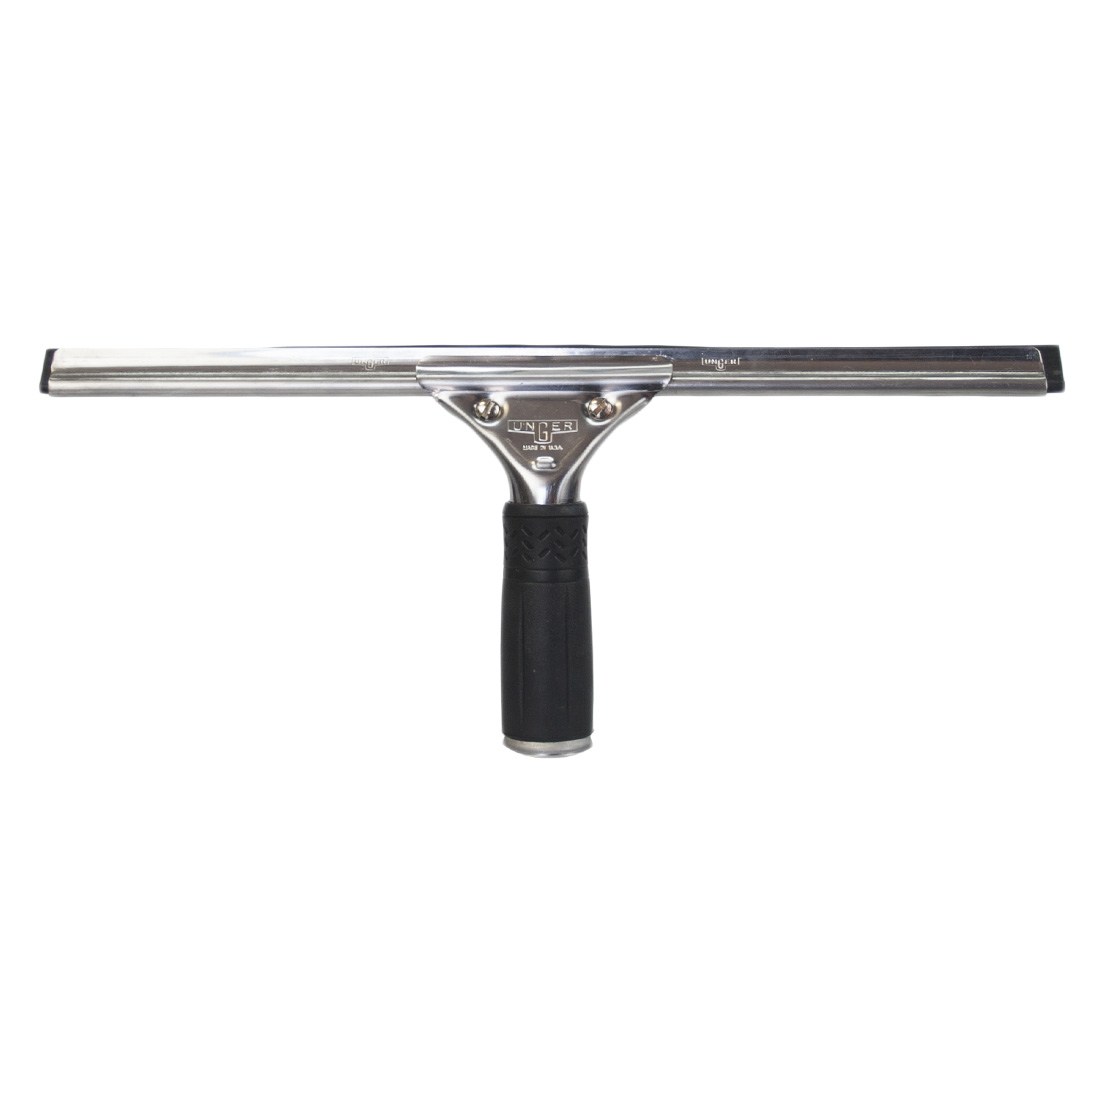 Squeegee for Window Cleaning with Stainless Steel Pole - China Window  Cleaning and Squeegee price